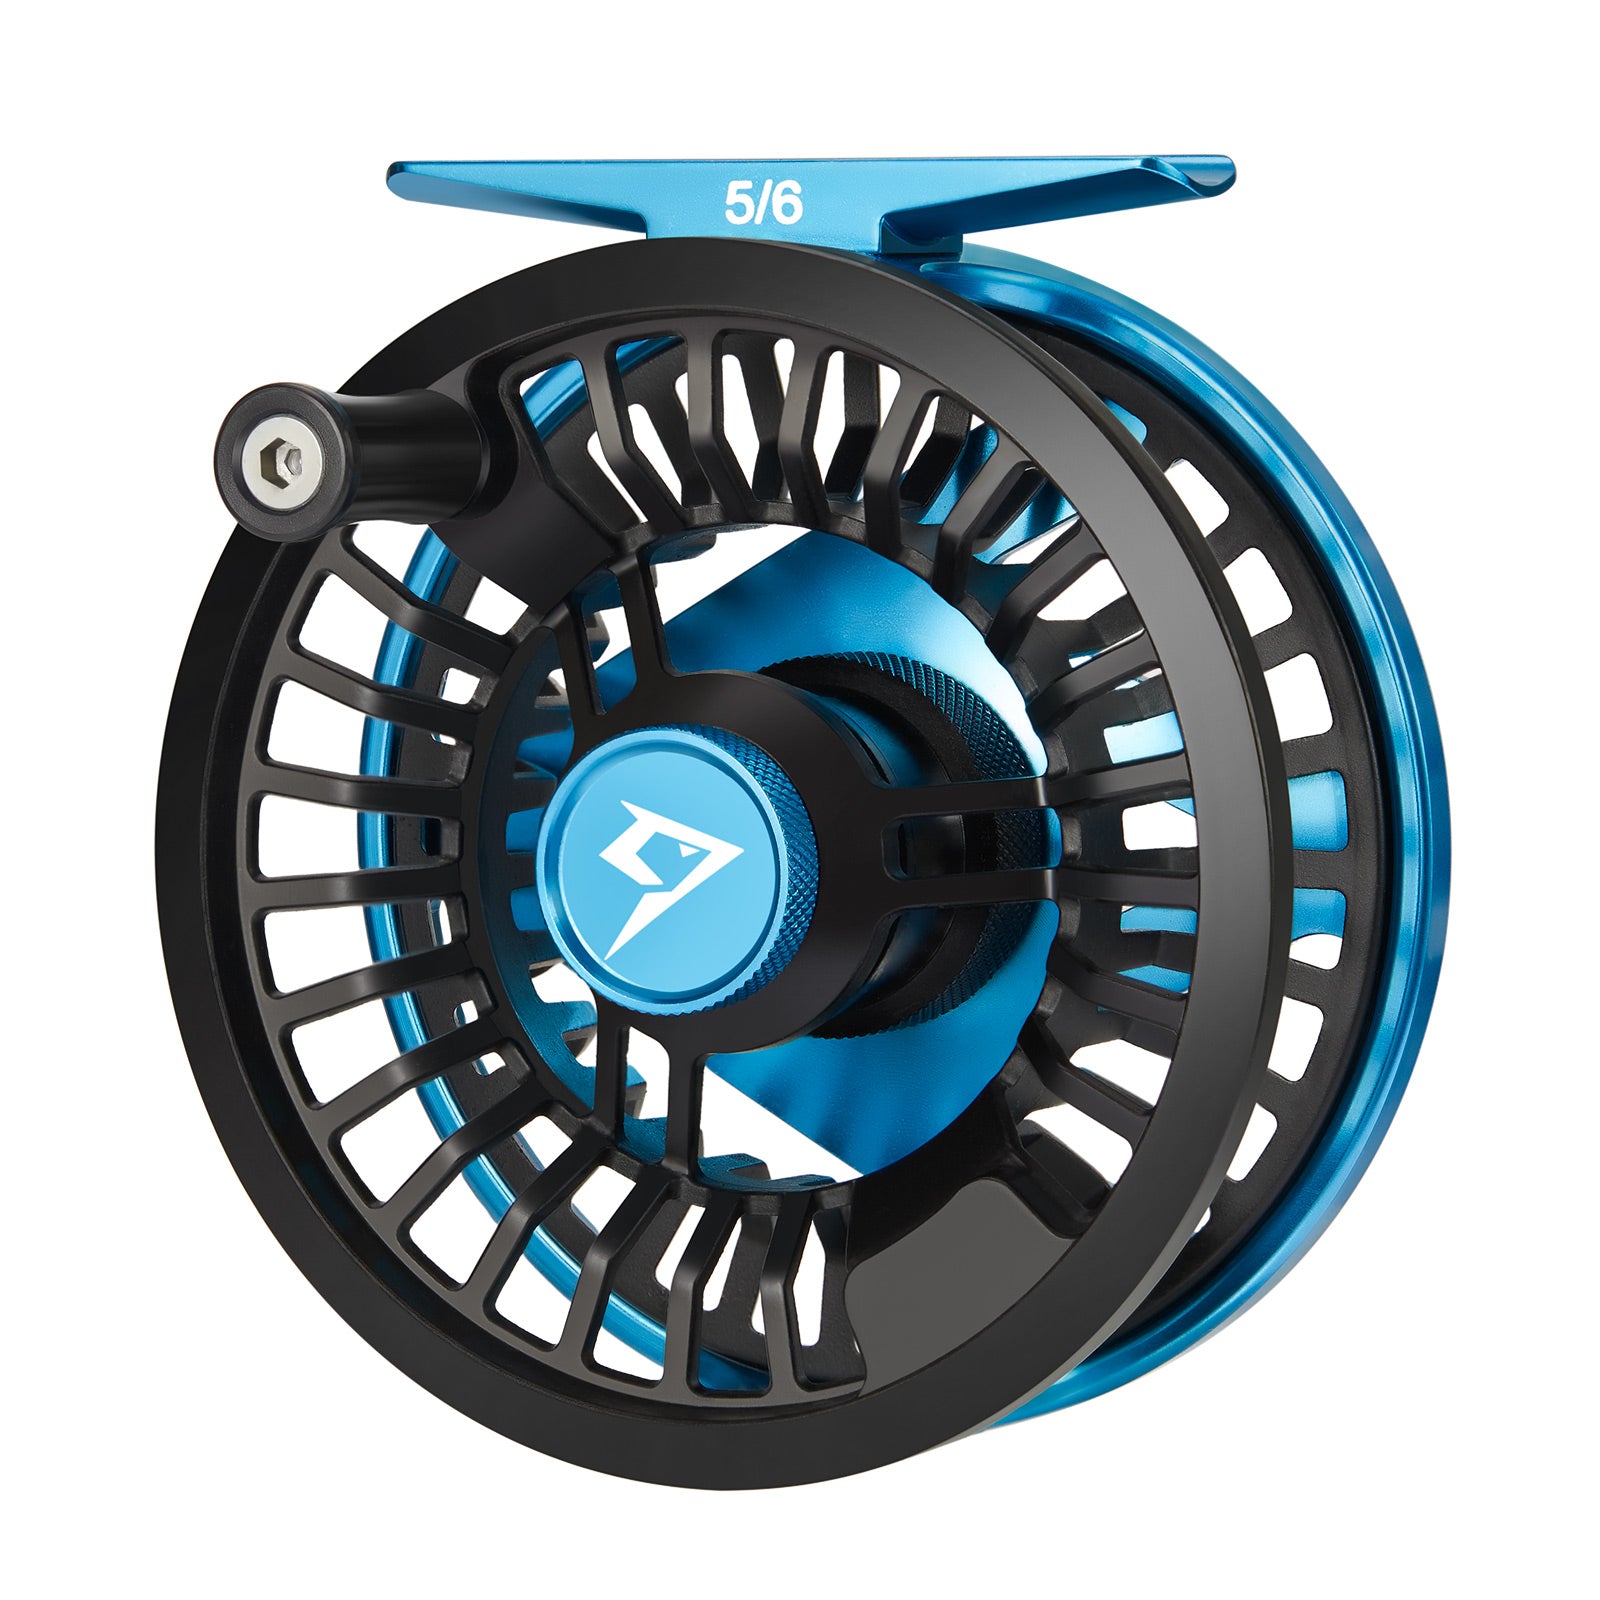 Piscifun® Aoka XS Fly Fishing Reel with Sealed Drag Sale